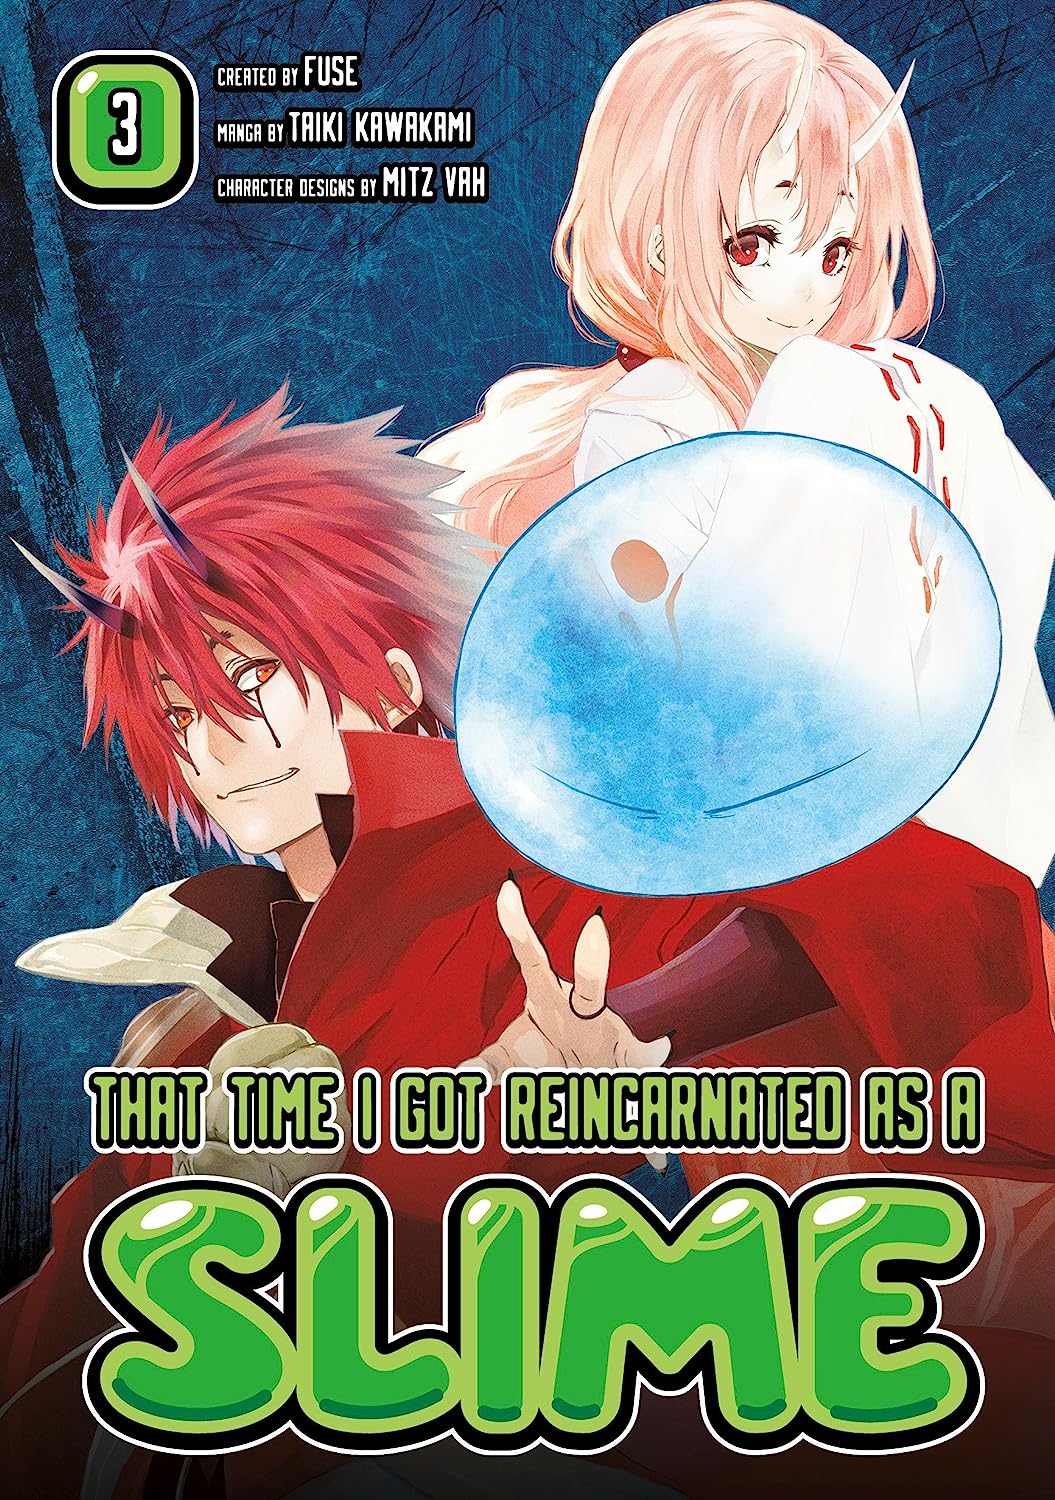 That Time I Got Reincarnated as a Slime # 3